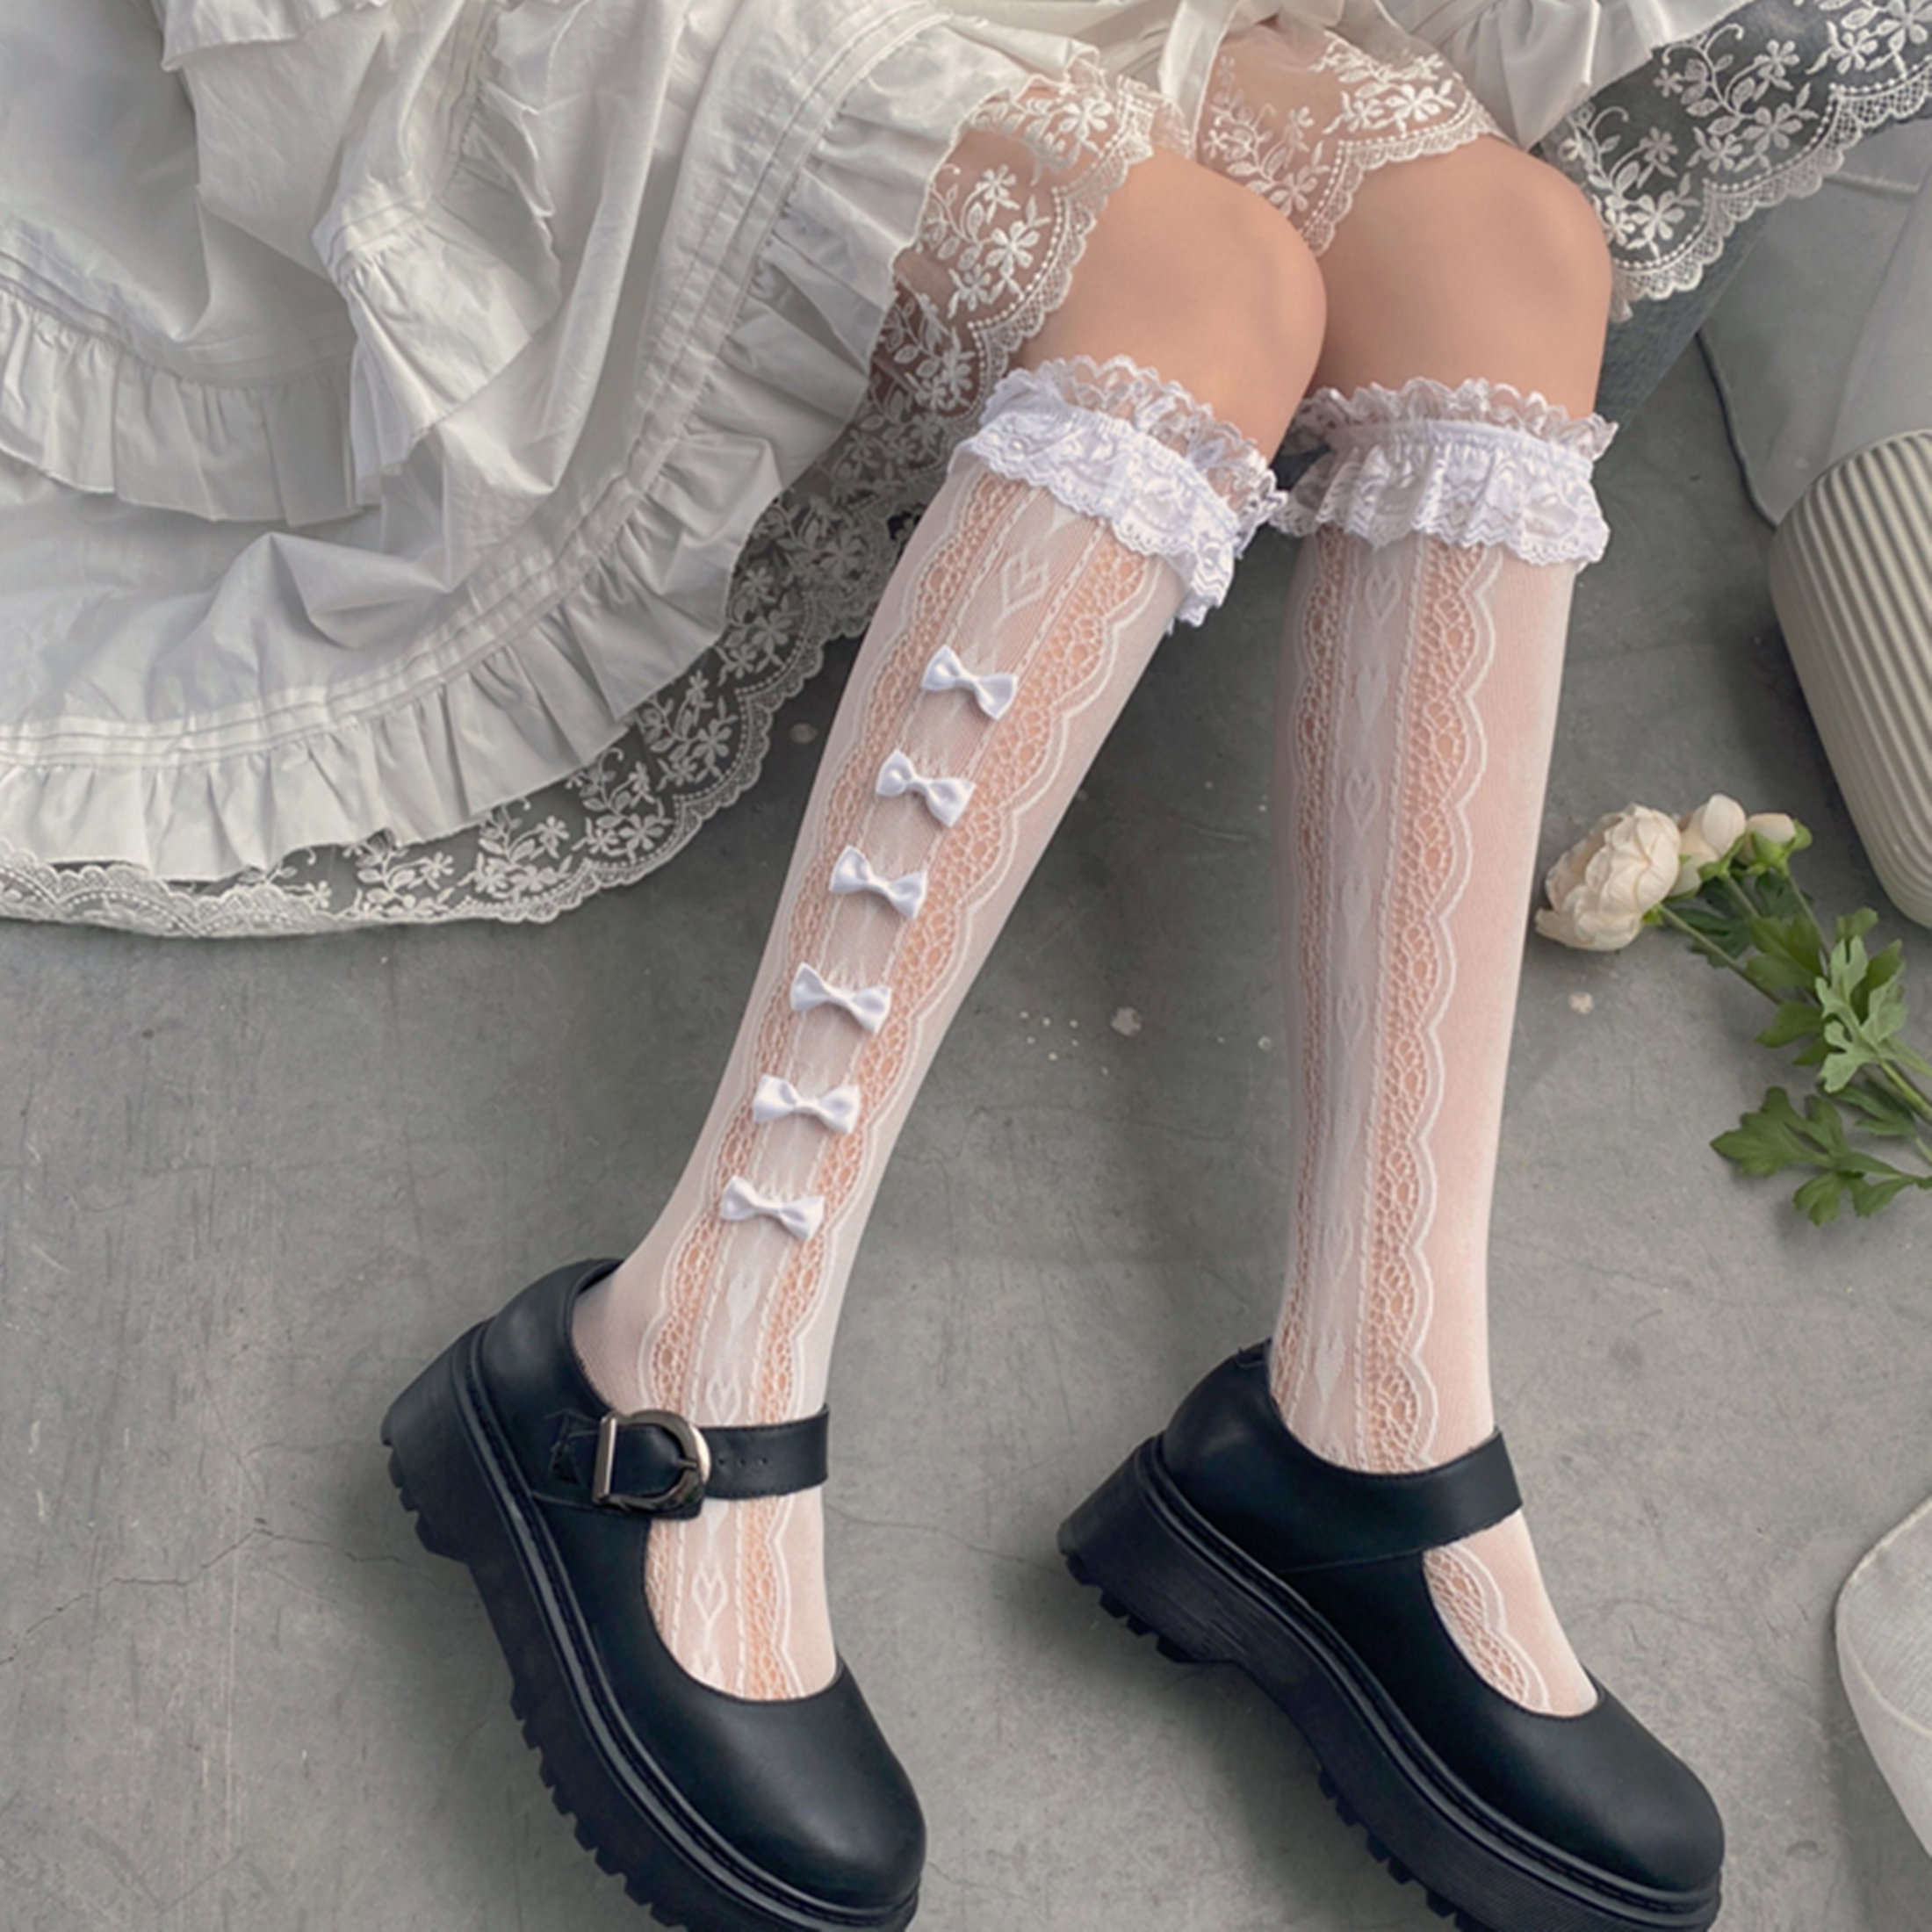 White Lace Ankle Socks - Y2K Cute and Retro Fashion